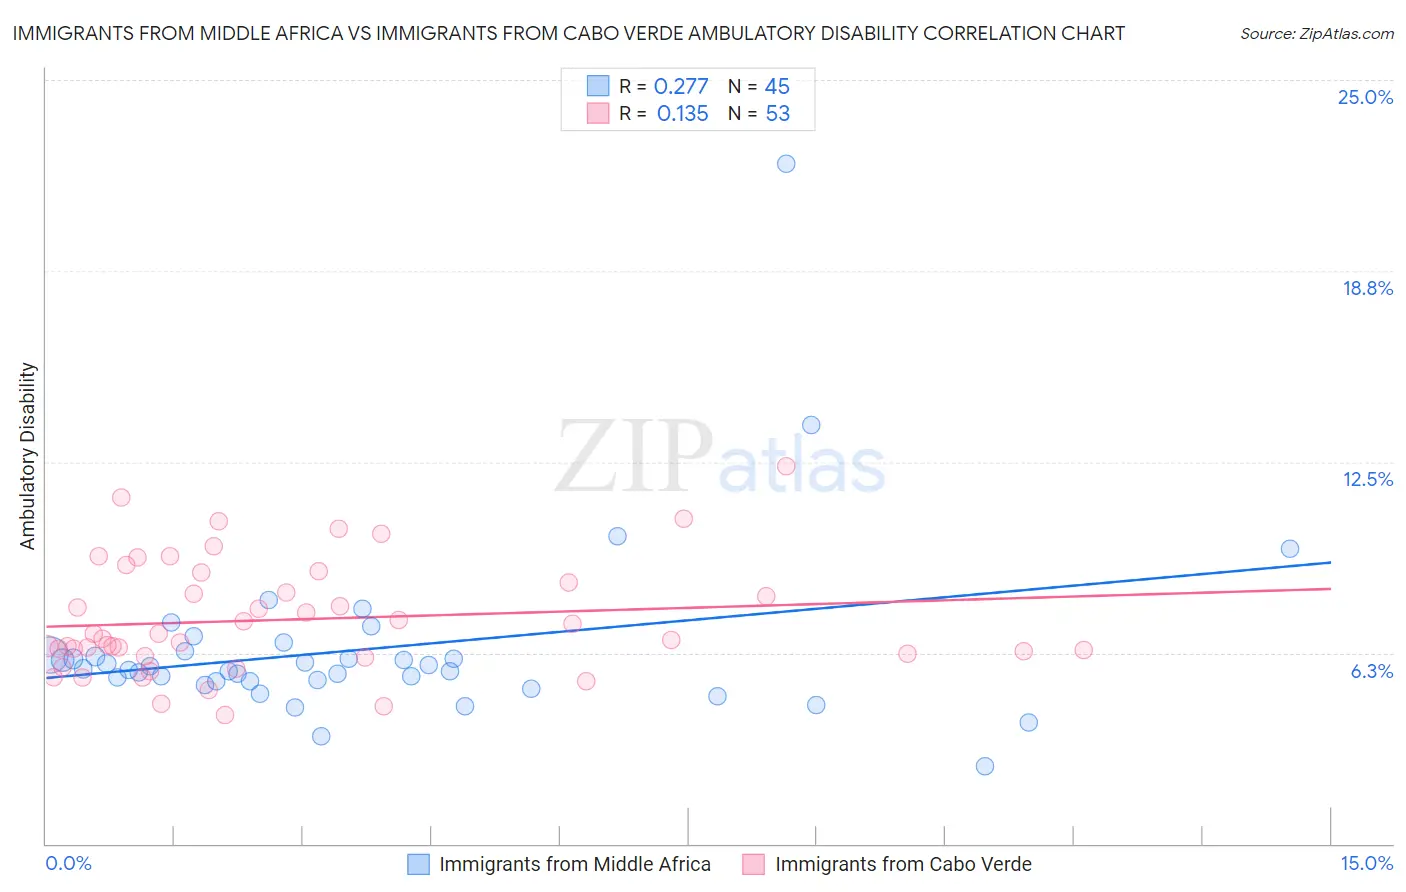 Immigrants from Middle Africa vs Immigrants from Cabo Verde Ambulatory Disability